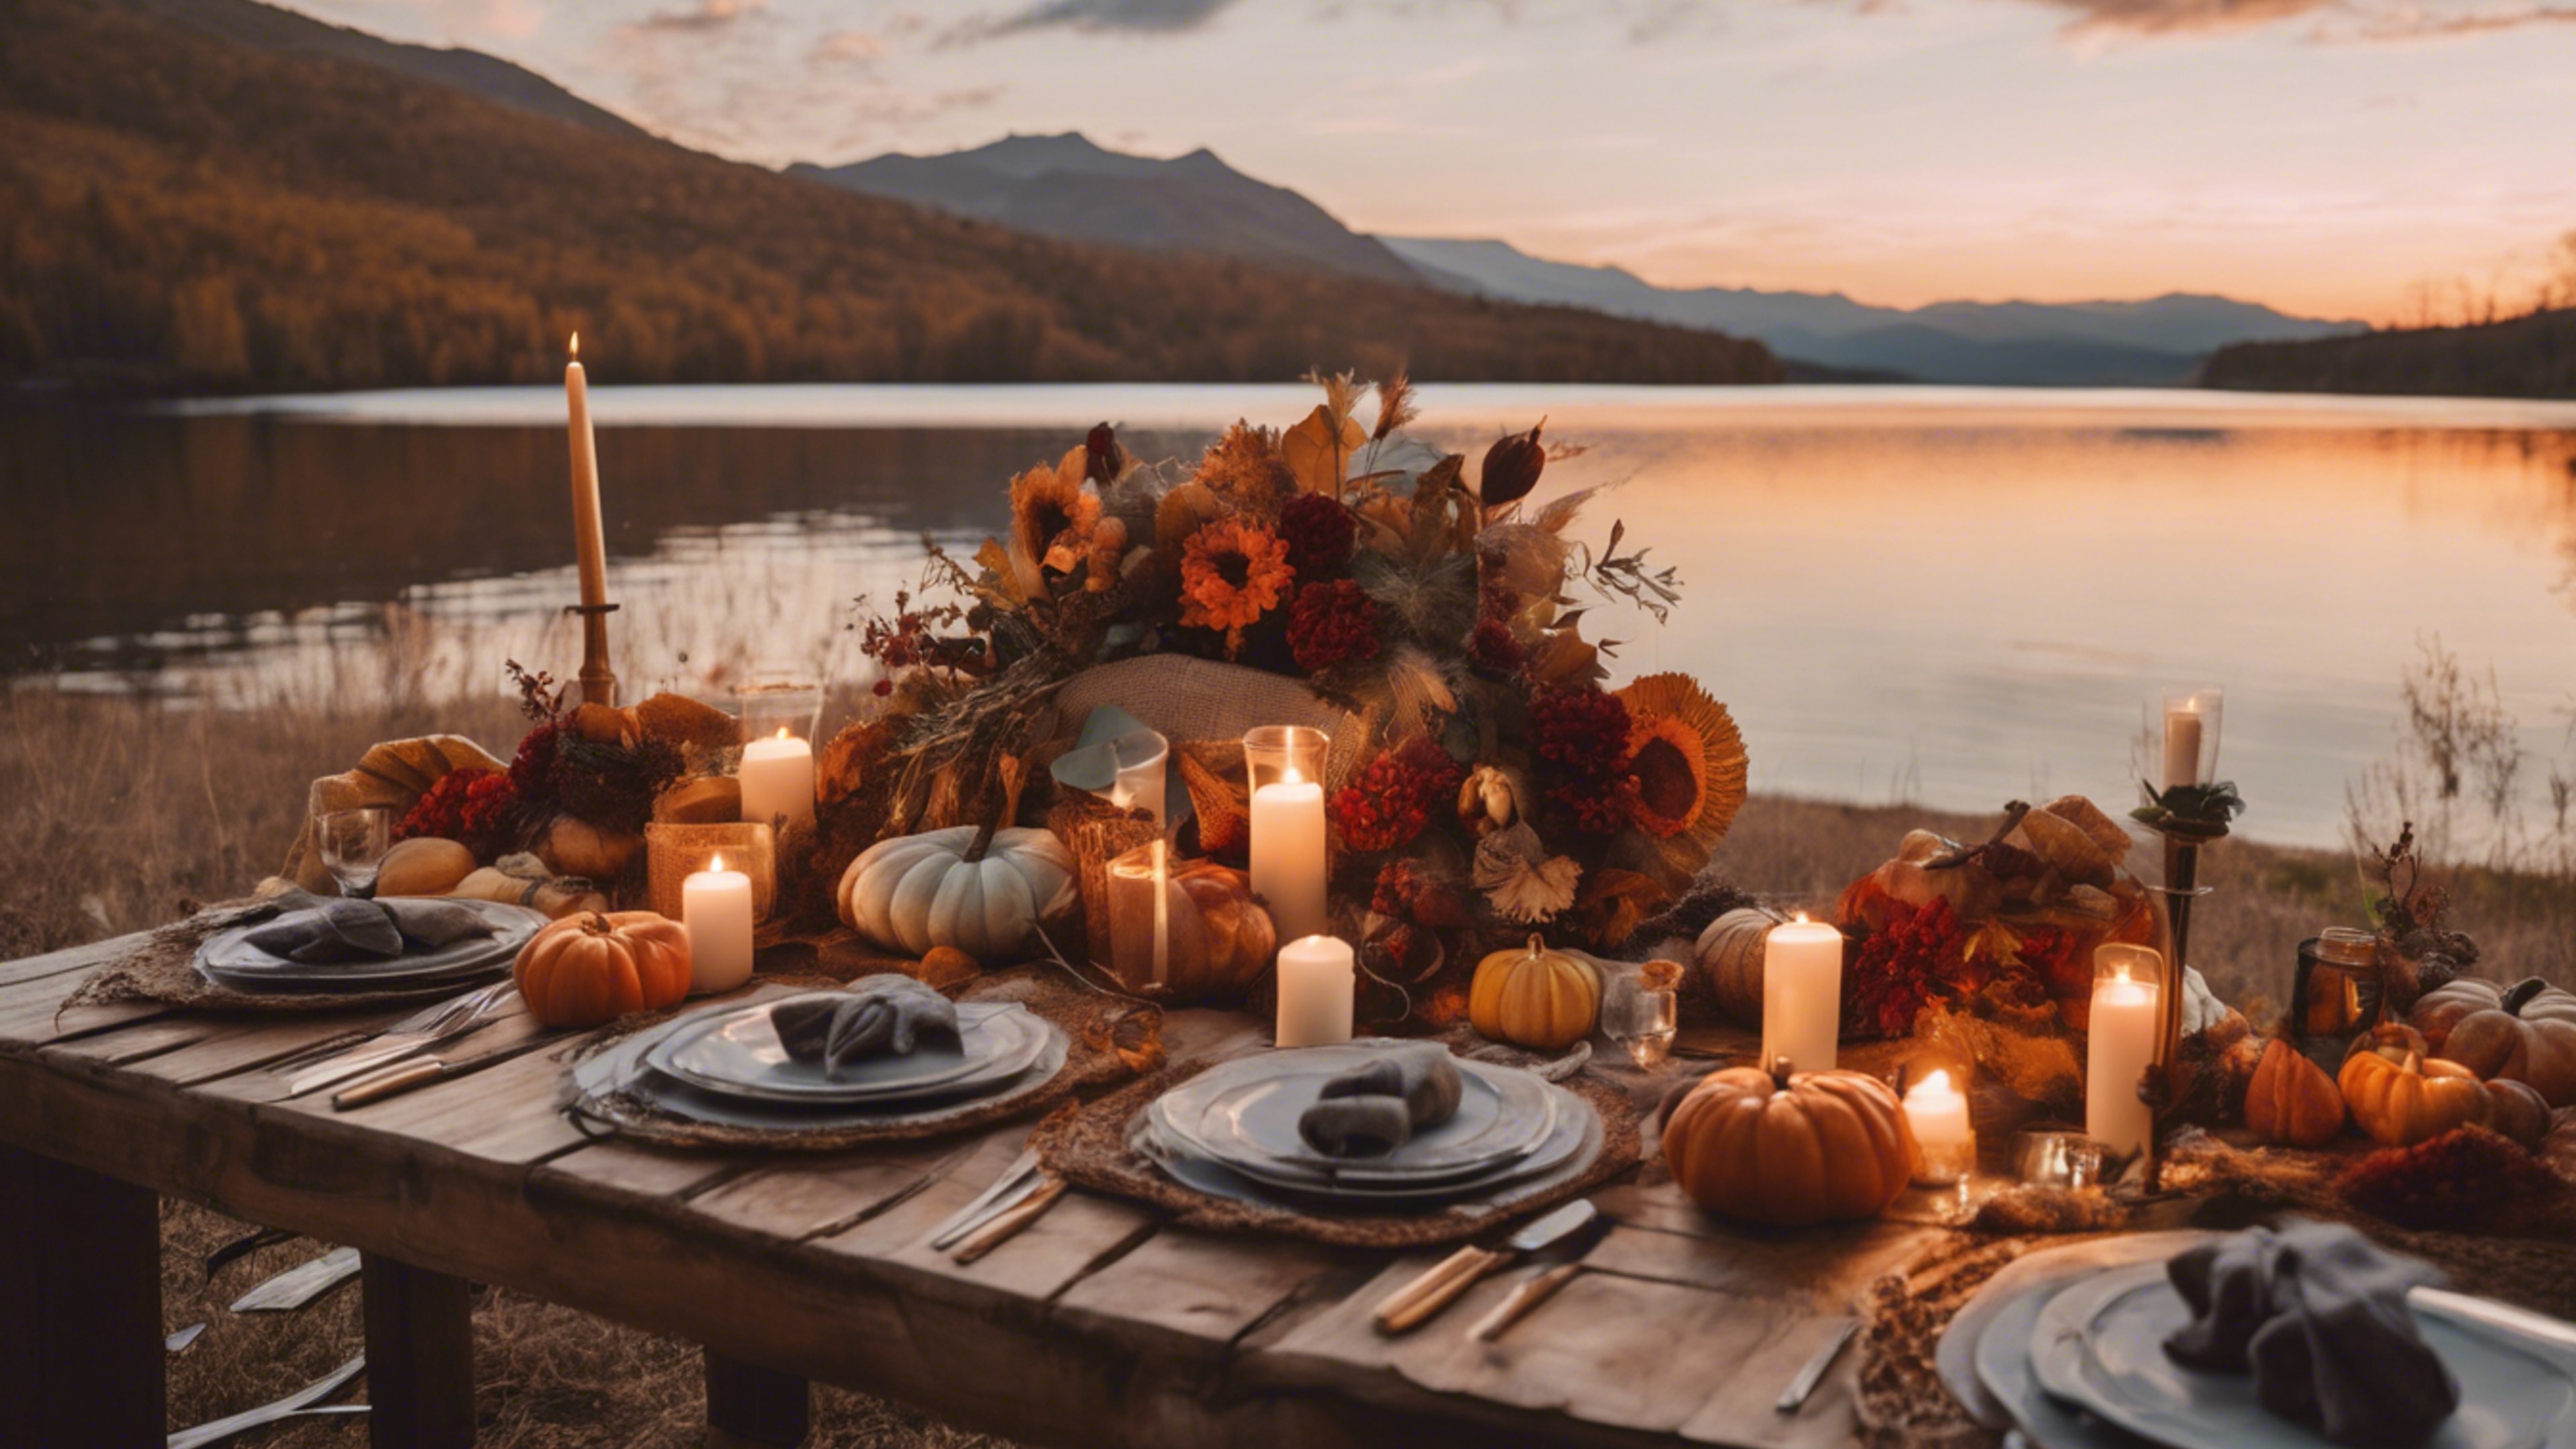 An outdoor Thanksgiving setup with boho decorations next to a breathtaking mountain lake during sunset. Tapeta[488ff8a1b73146e3b682]